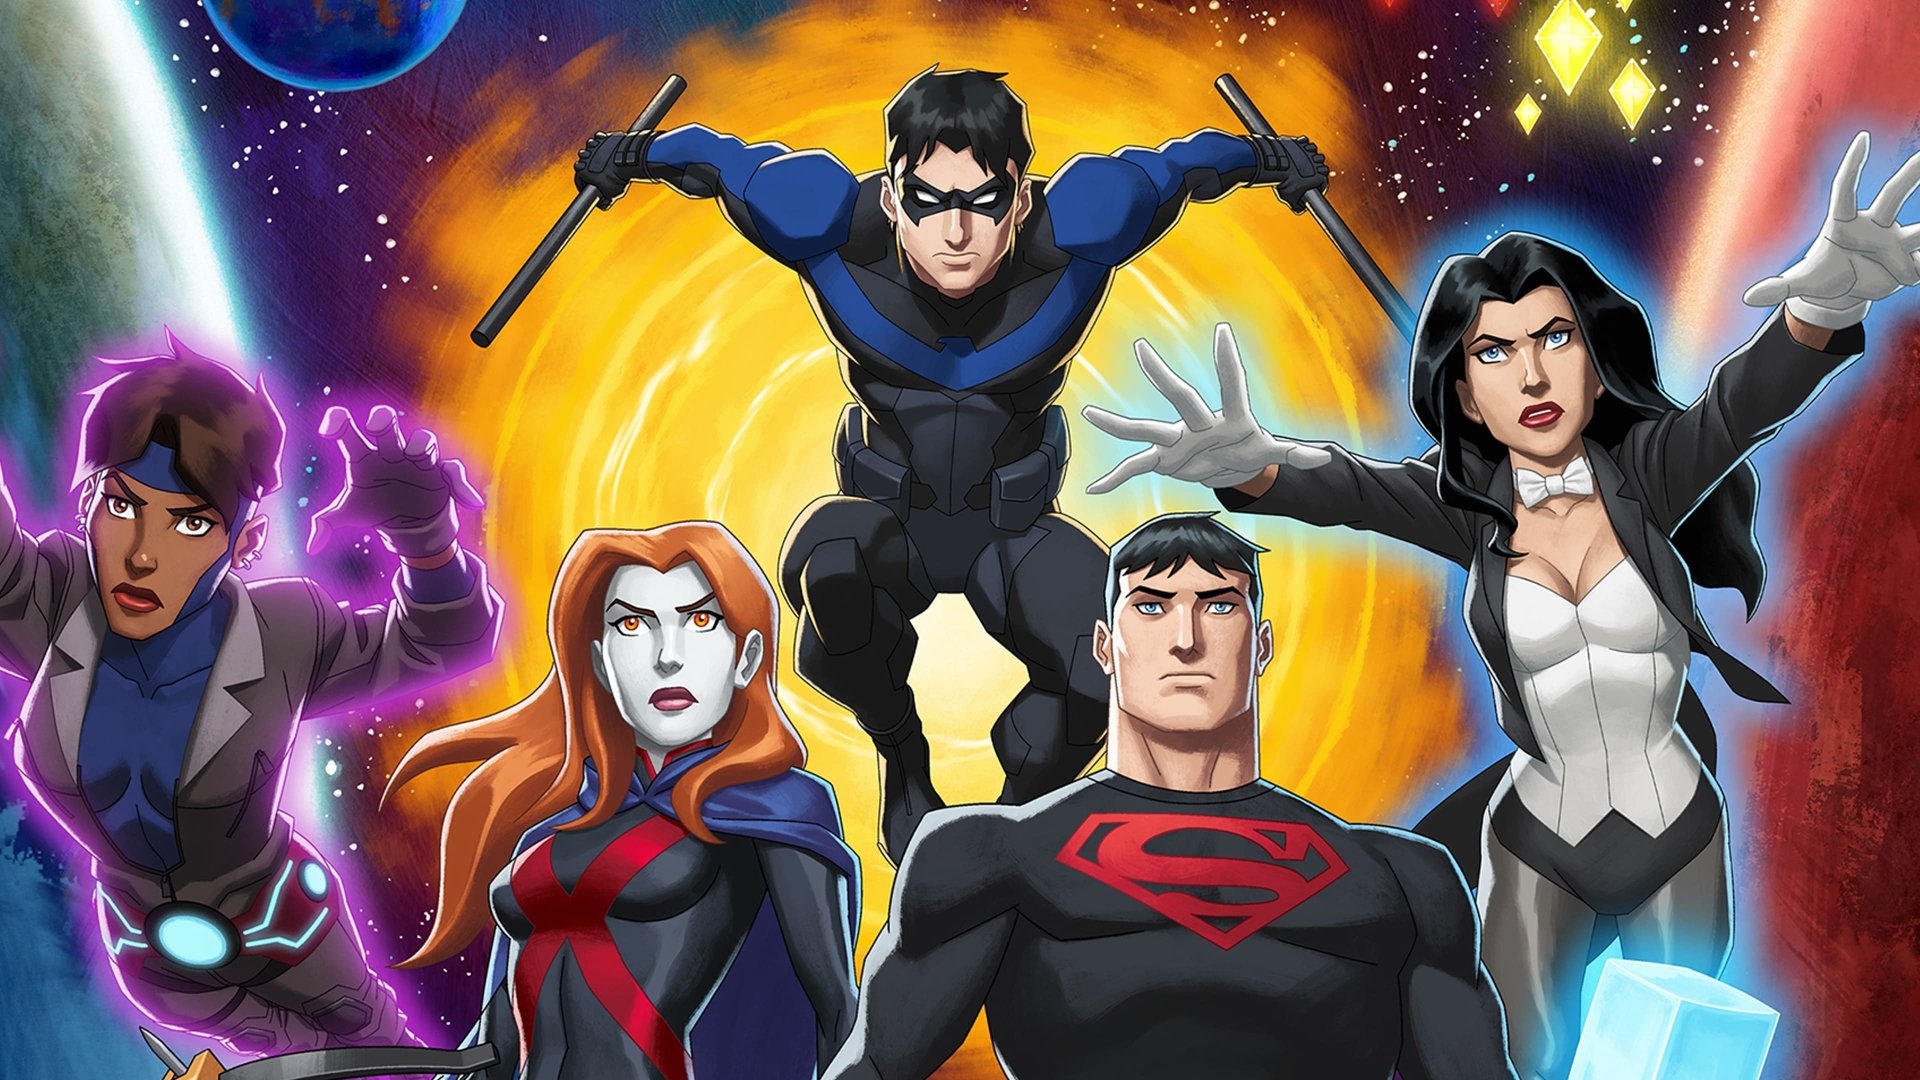 Young Justice 4k Ultra HD Wallpaper.